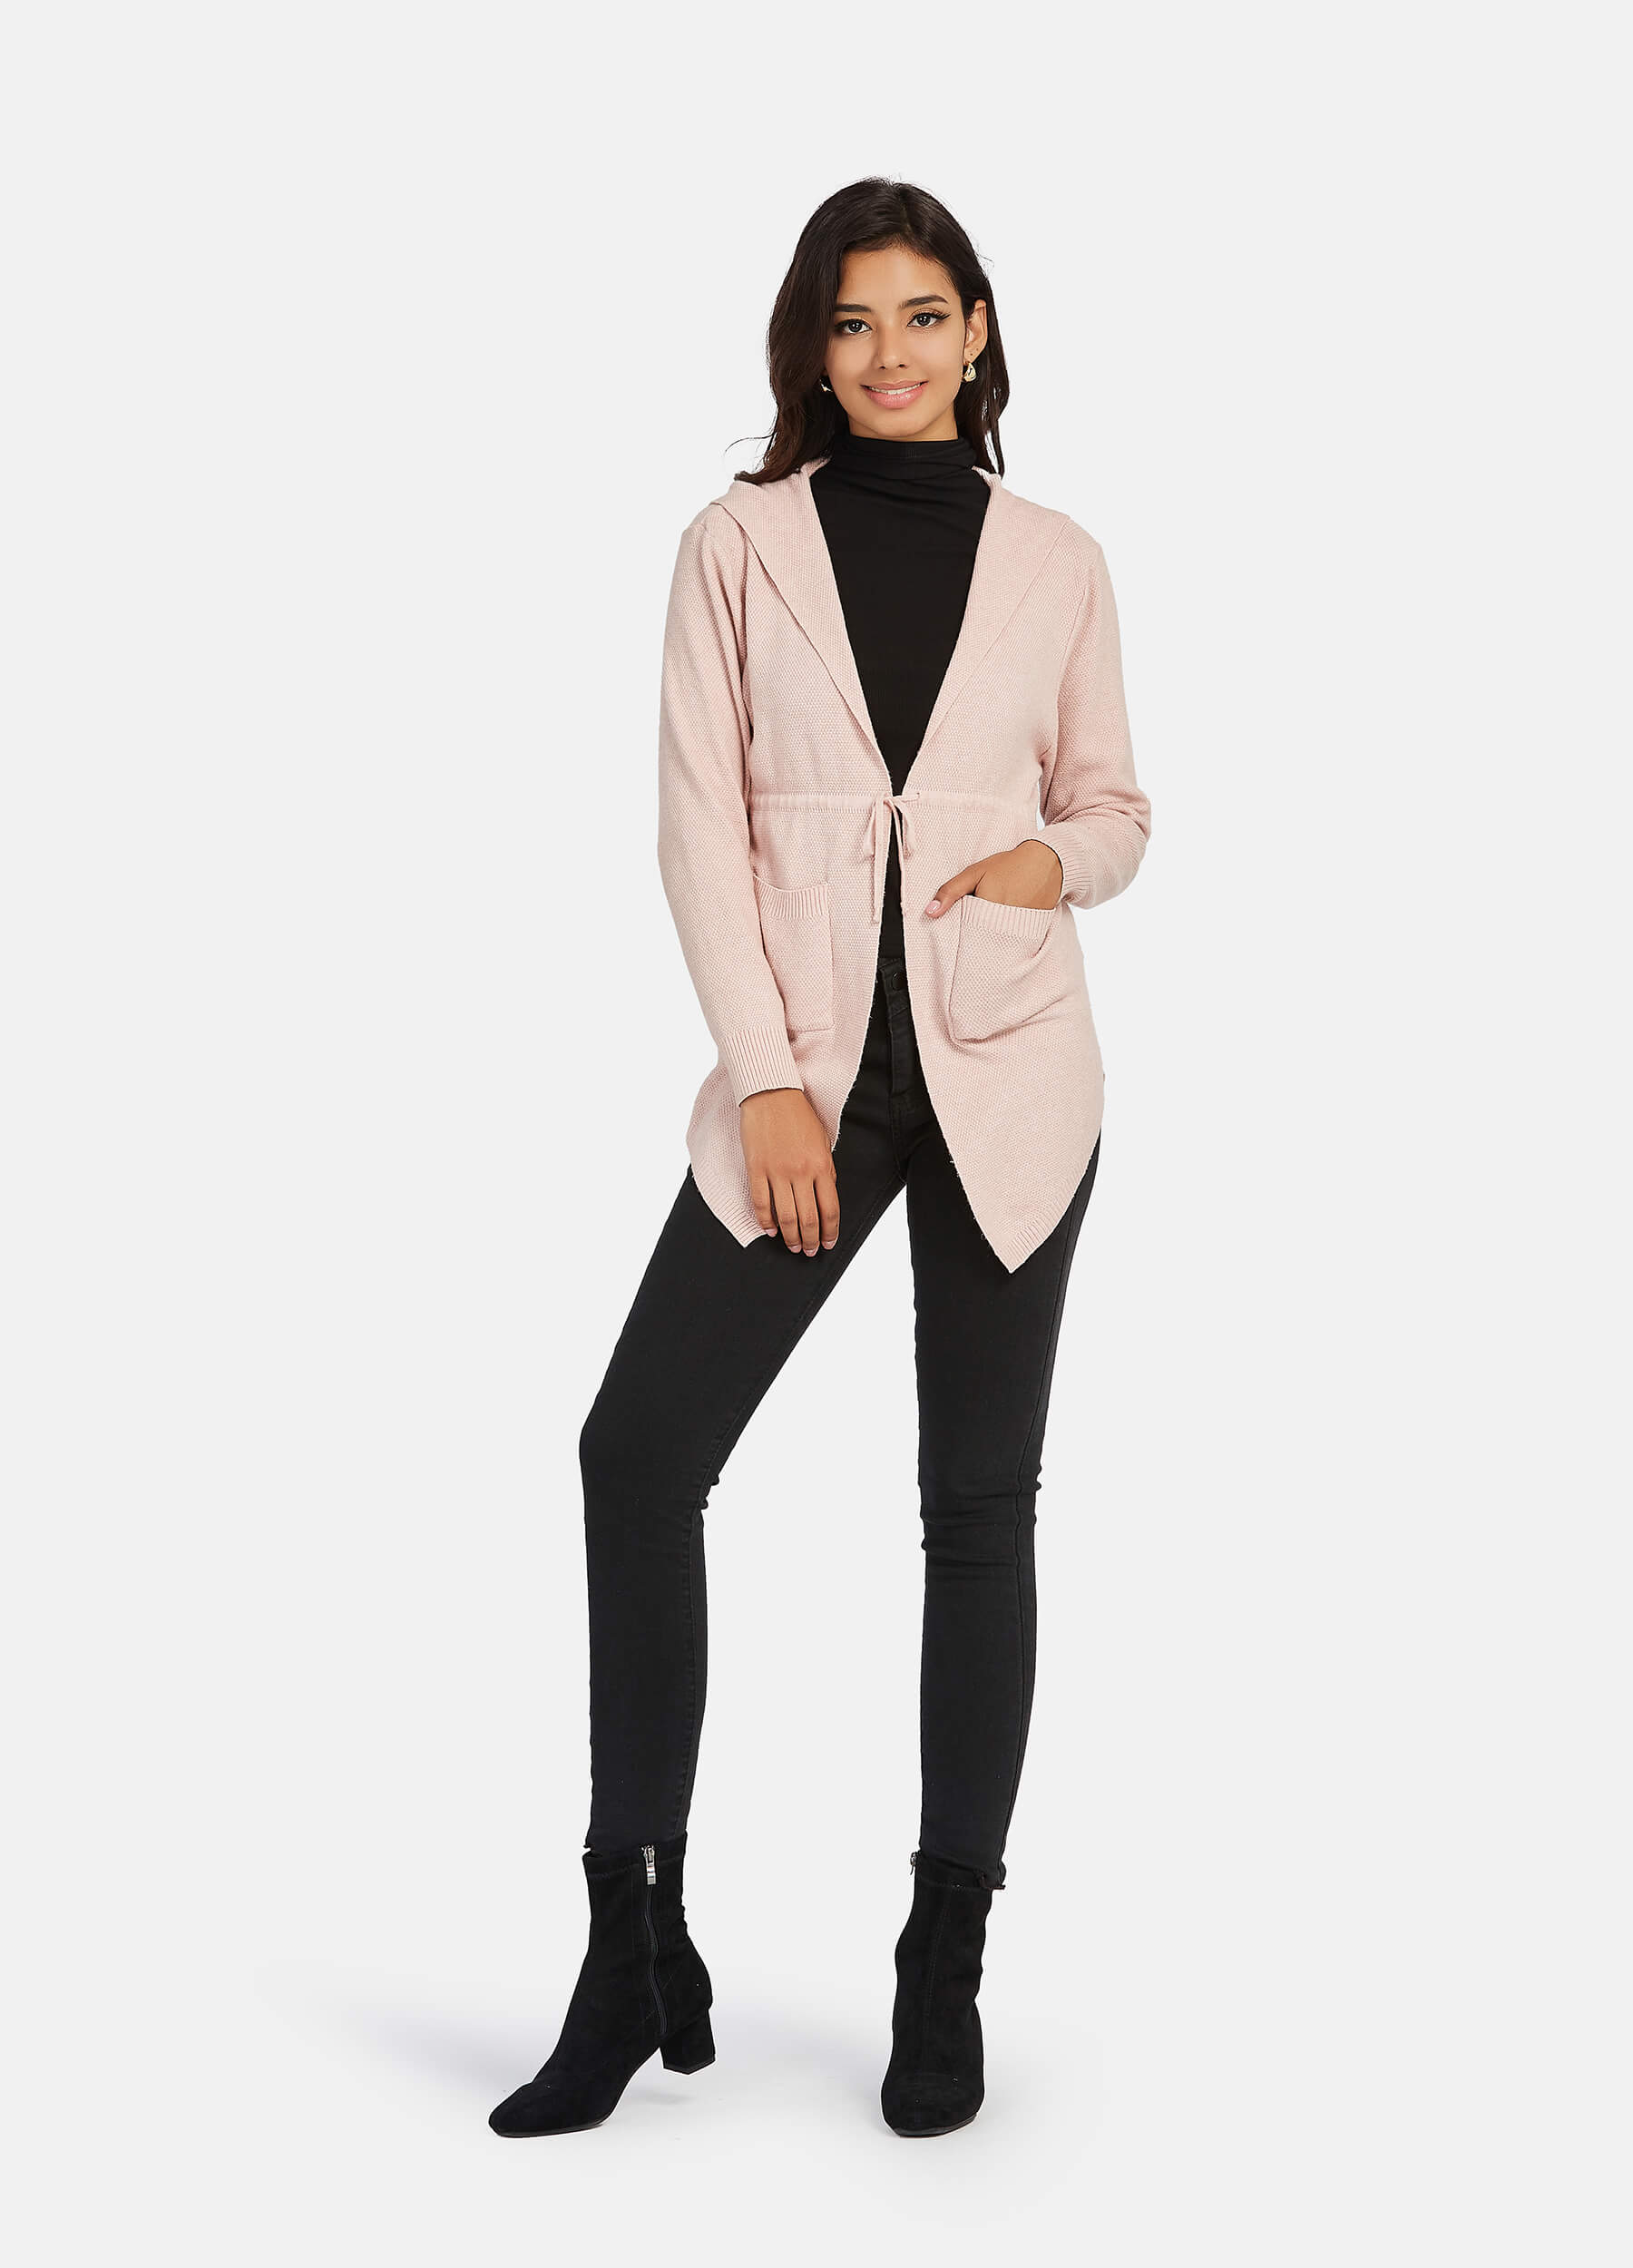 FINEPEEK Women's Long Sleeve Cable Knit Hooded Pink Cardigan